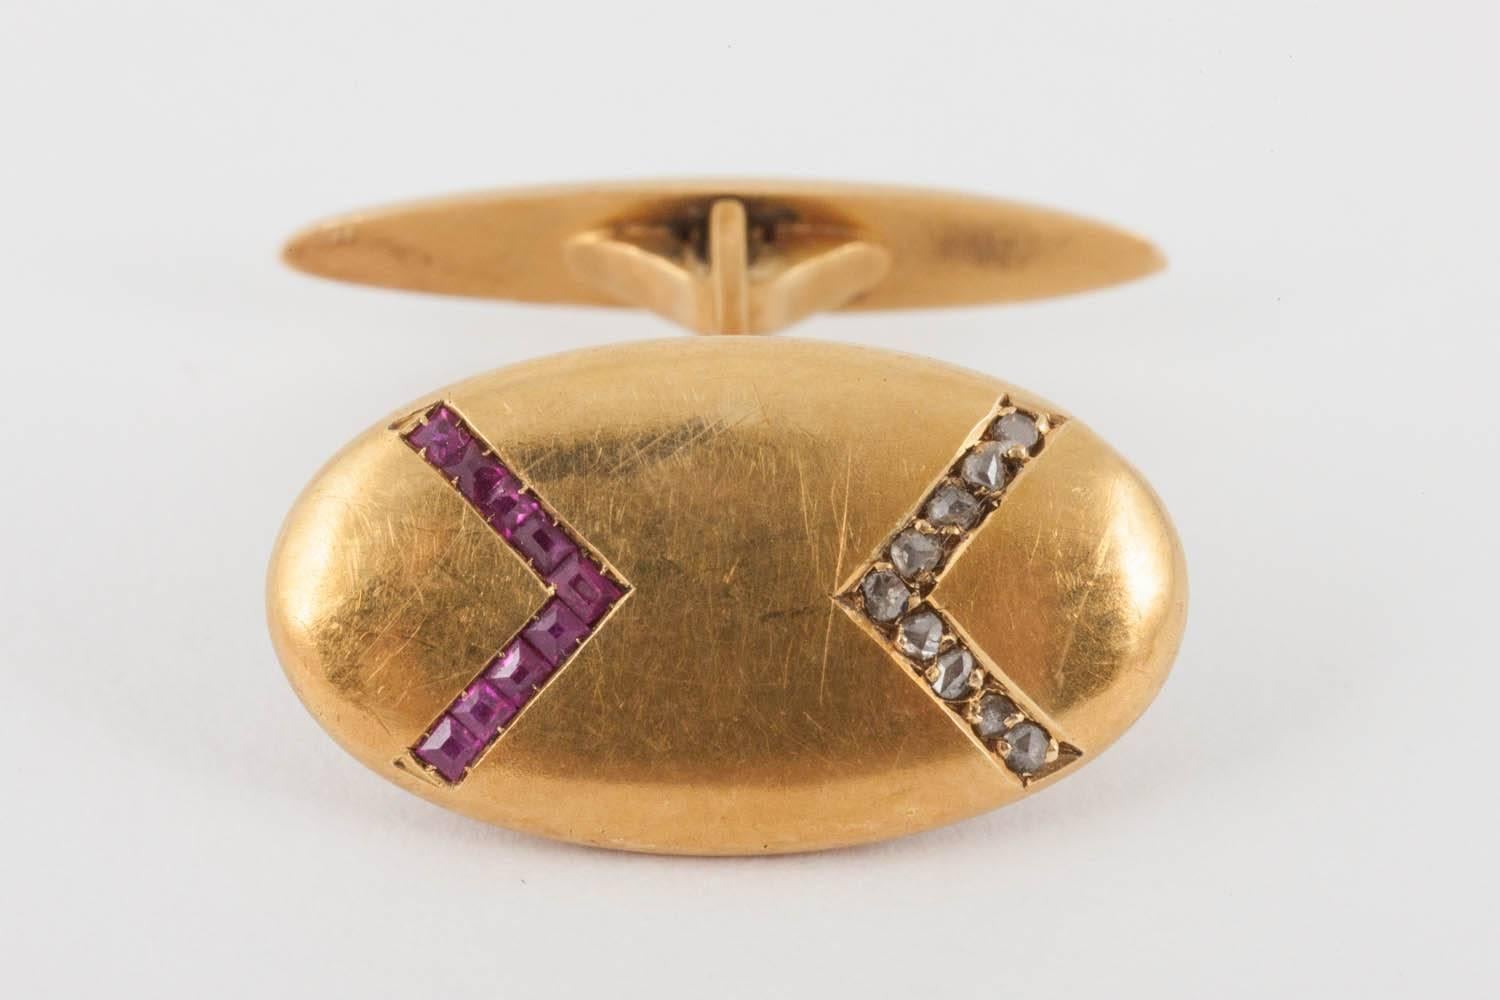 A pair of single sided, antique cufflinks in 18 karat yellow gold with an excellent patina. Set with a v-shaped design of rose cut diamonds and Burma rubies with a boat shaped terminal.
Face of link measures 10mm wide and 20mm in length.
Antique